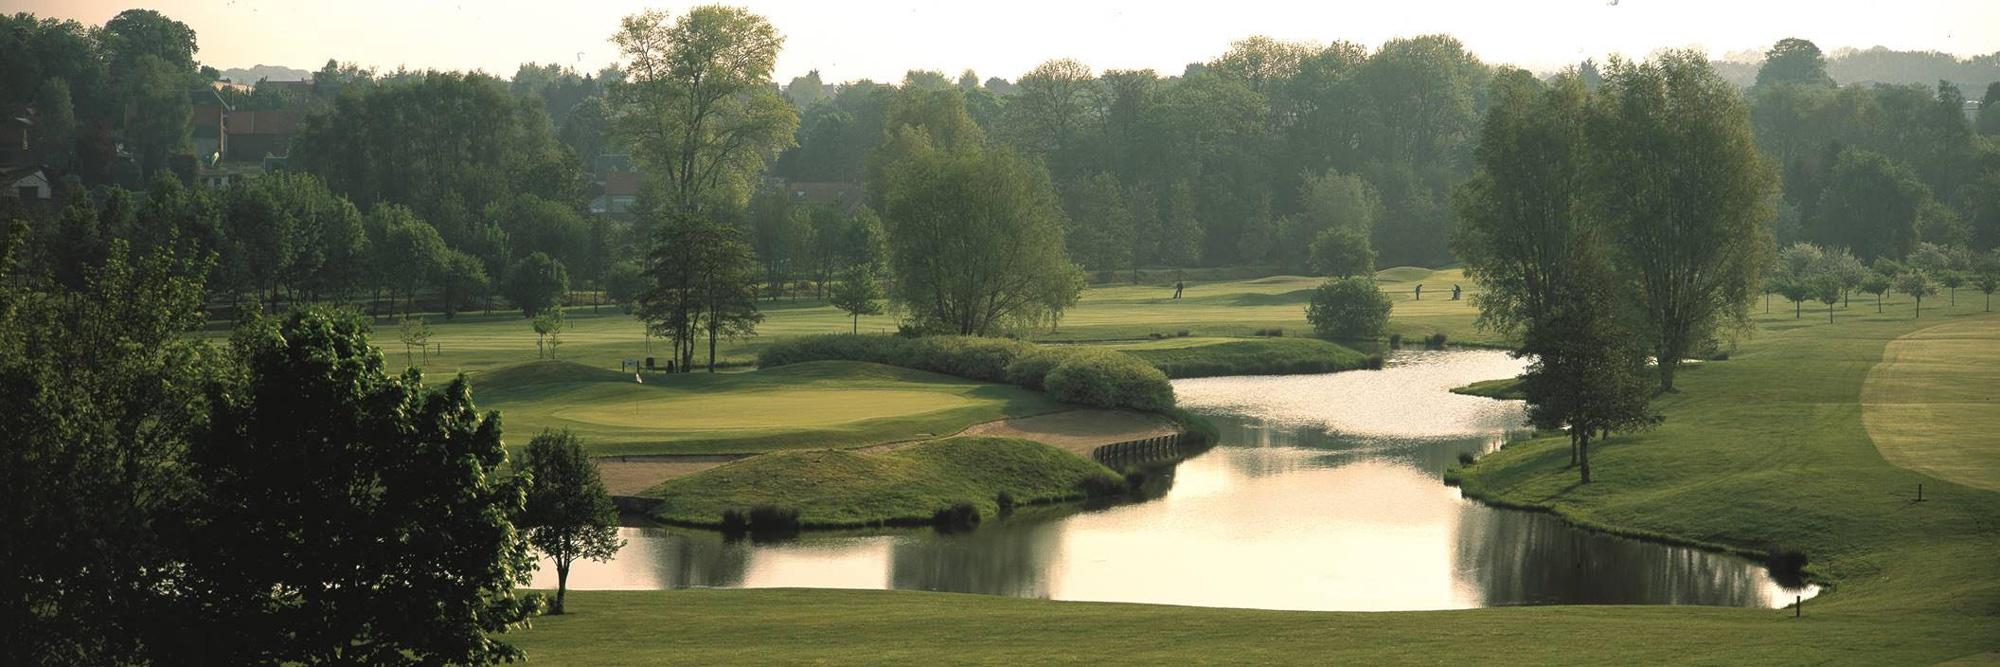 Golf d Arras has got some of the premiere golf course within Northern France